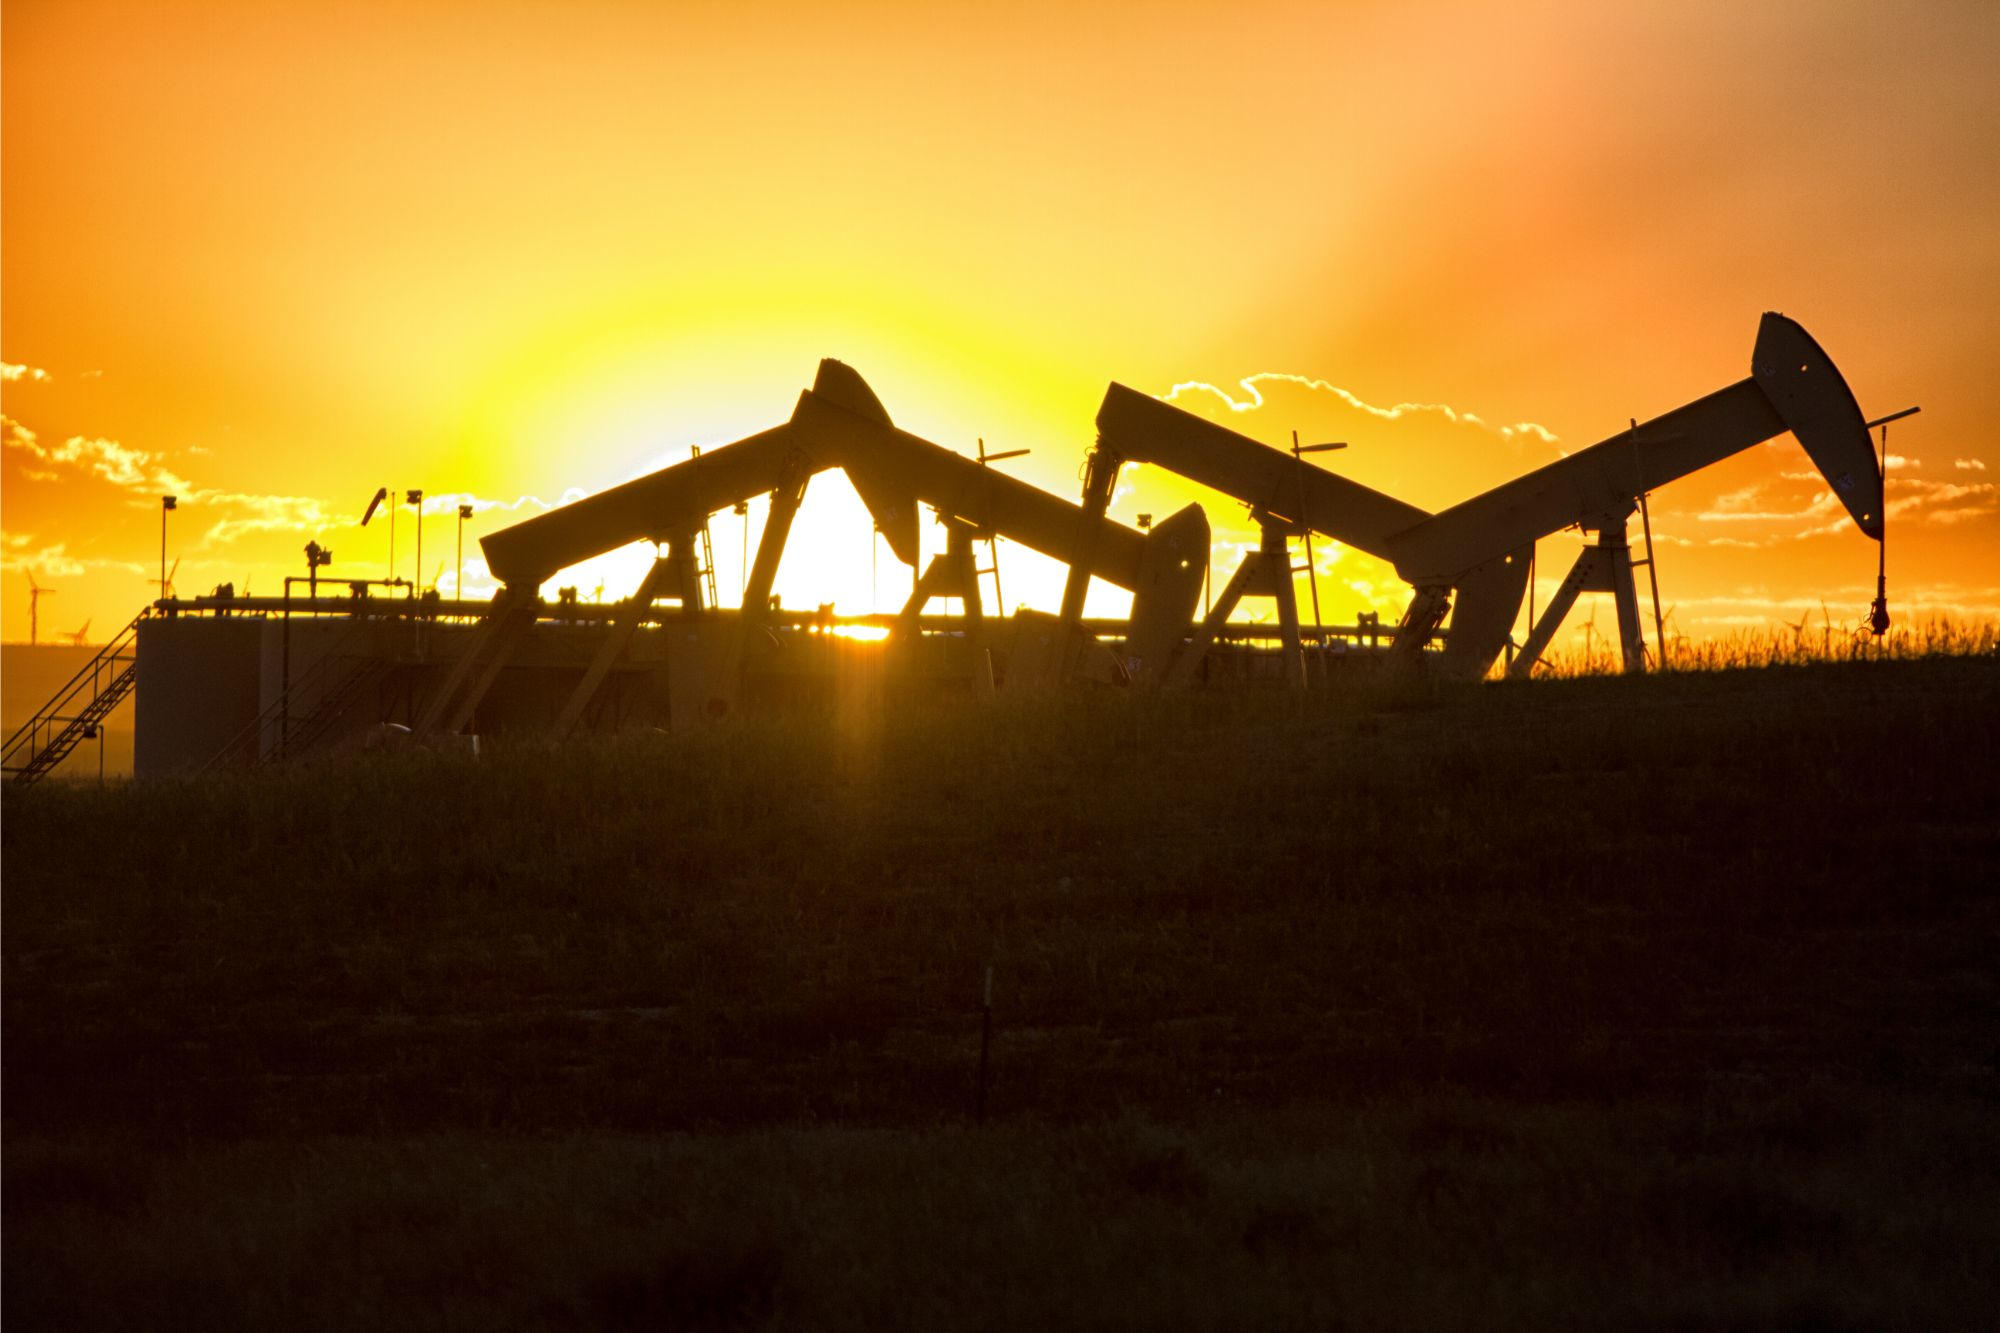 Sunset over hydraulic fracturing oil well